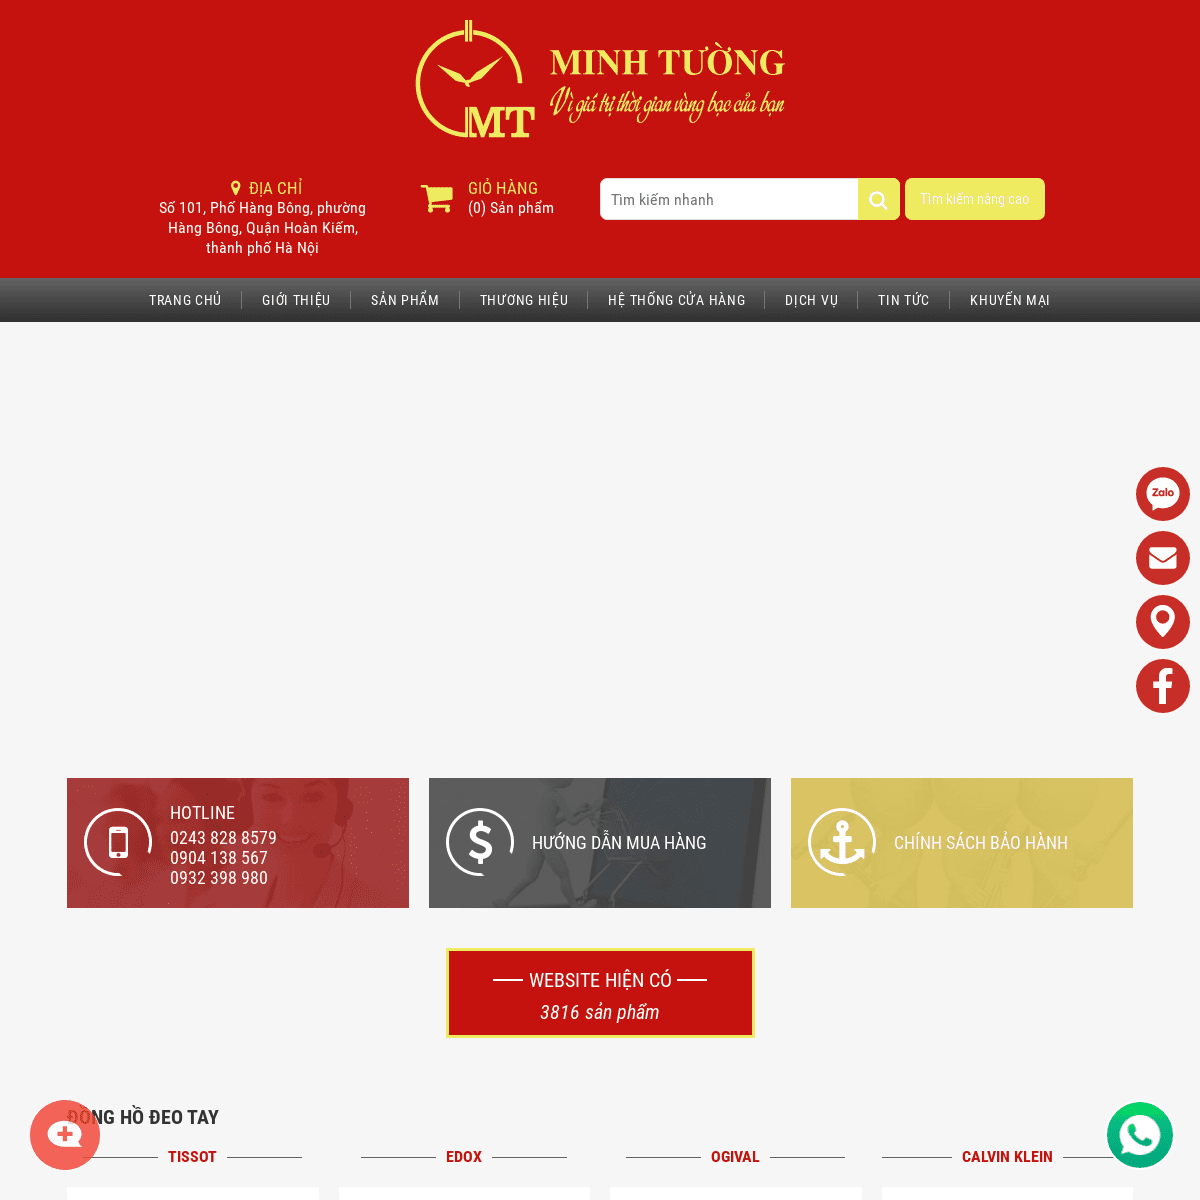 A complete backup of https://donghominhtuong.com.vn